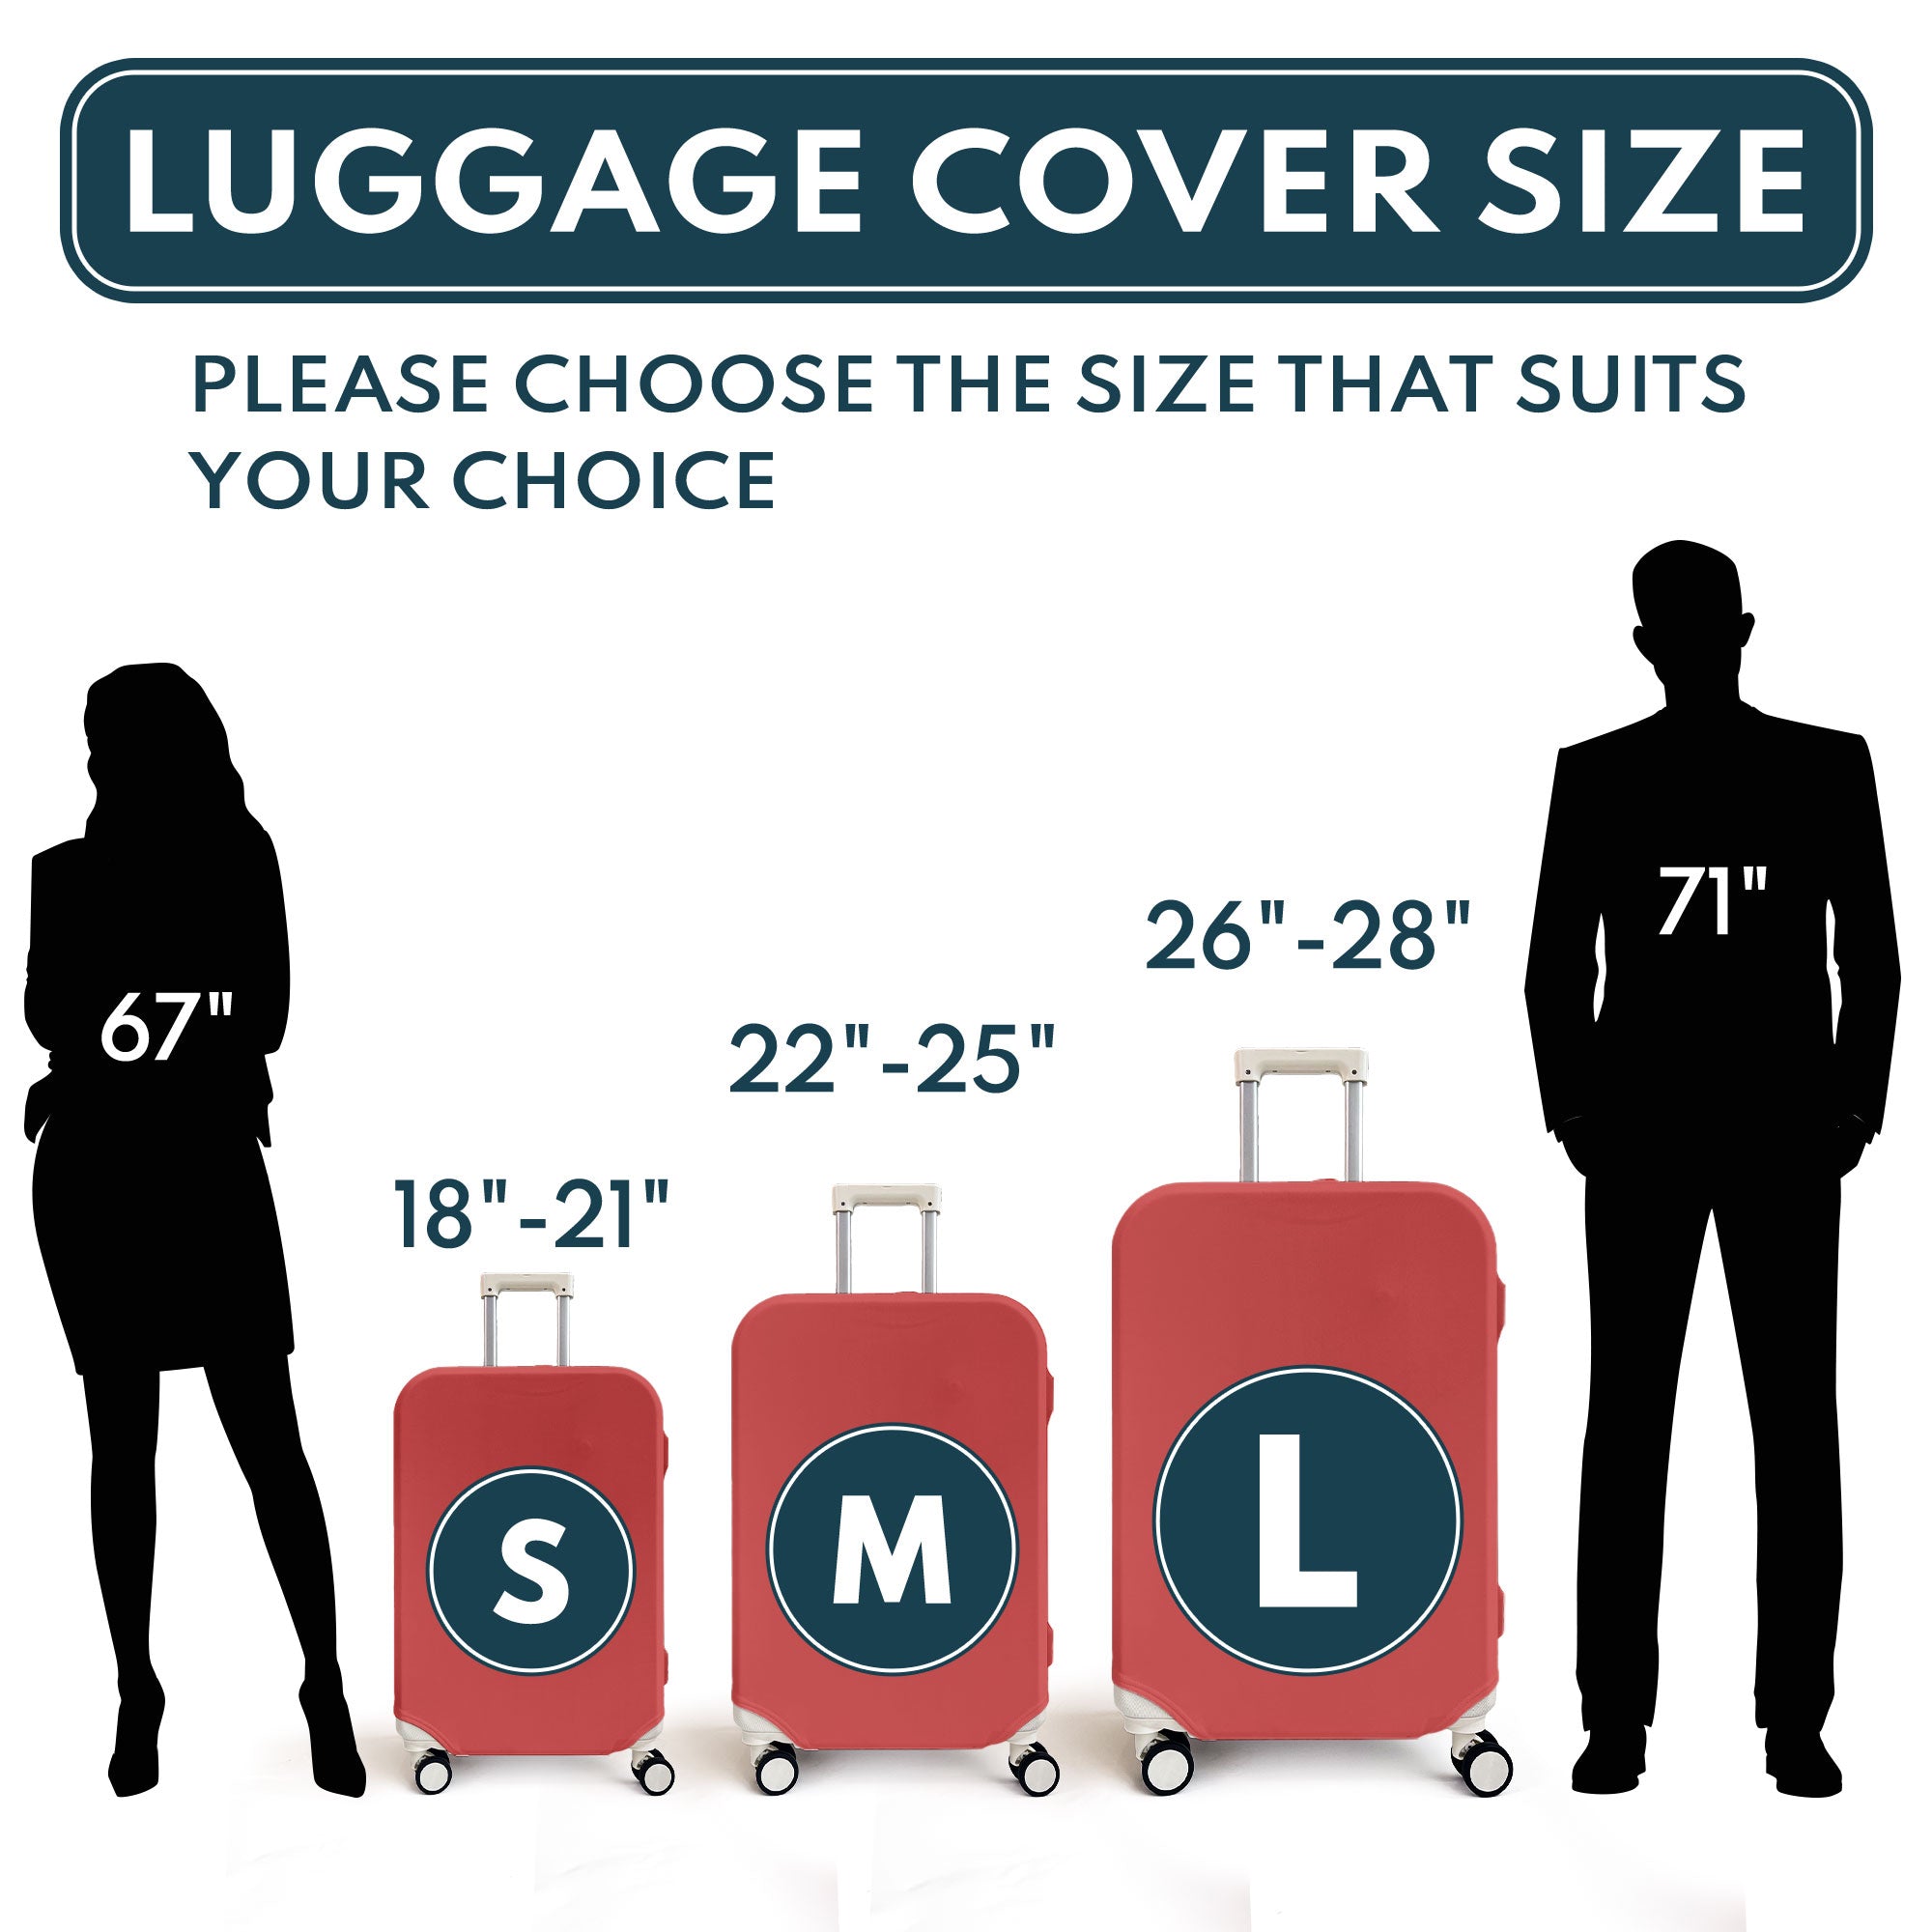 size-chart-luggage-cover